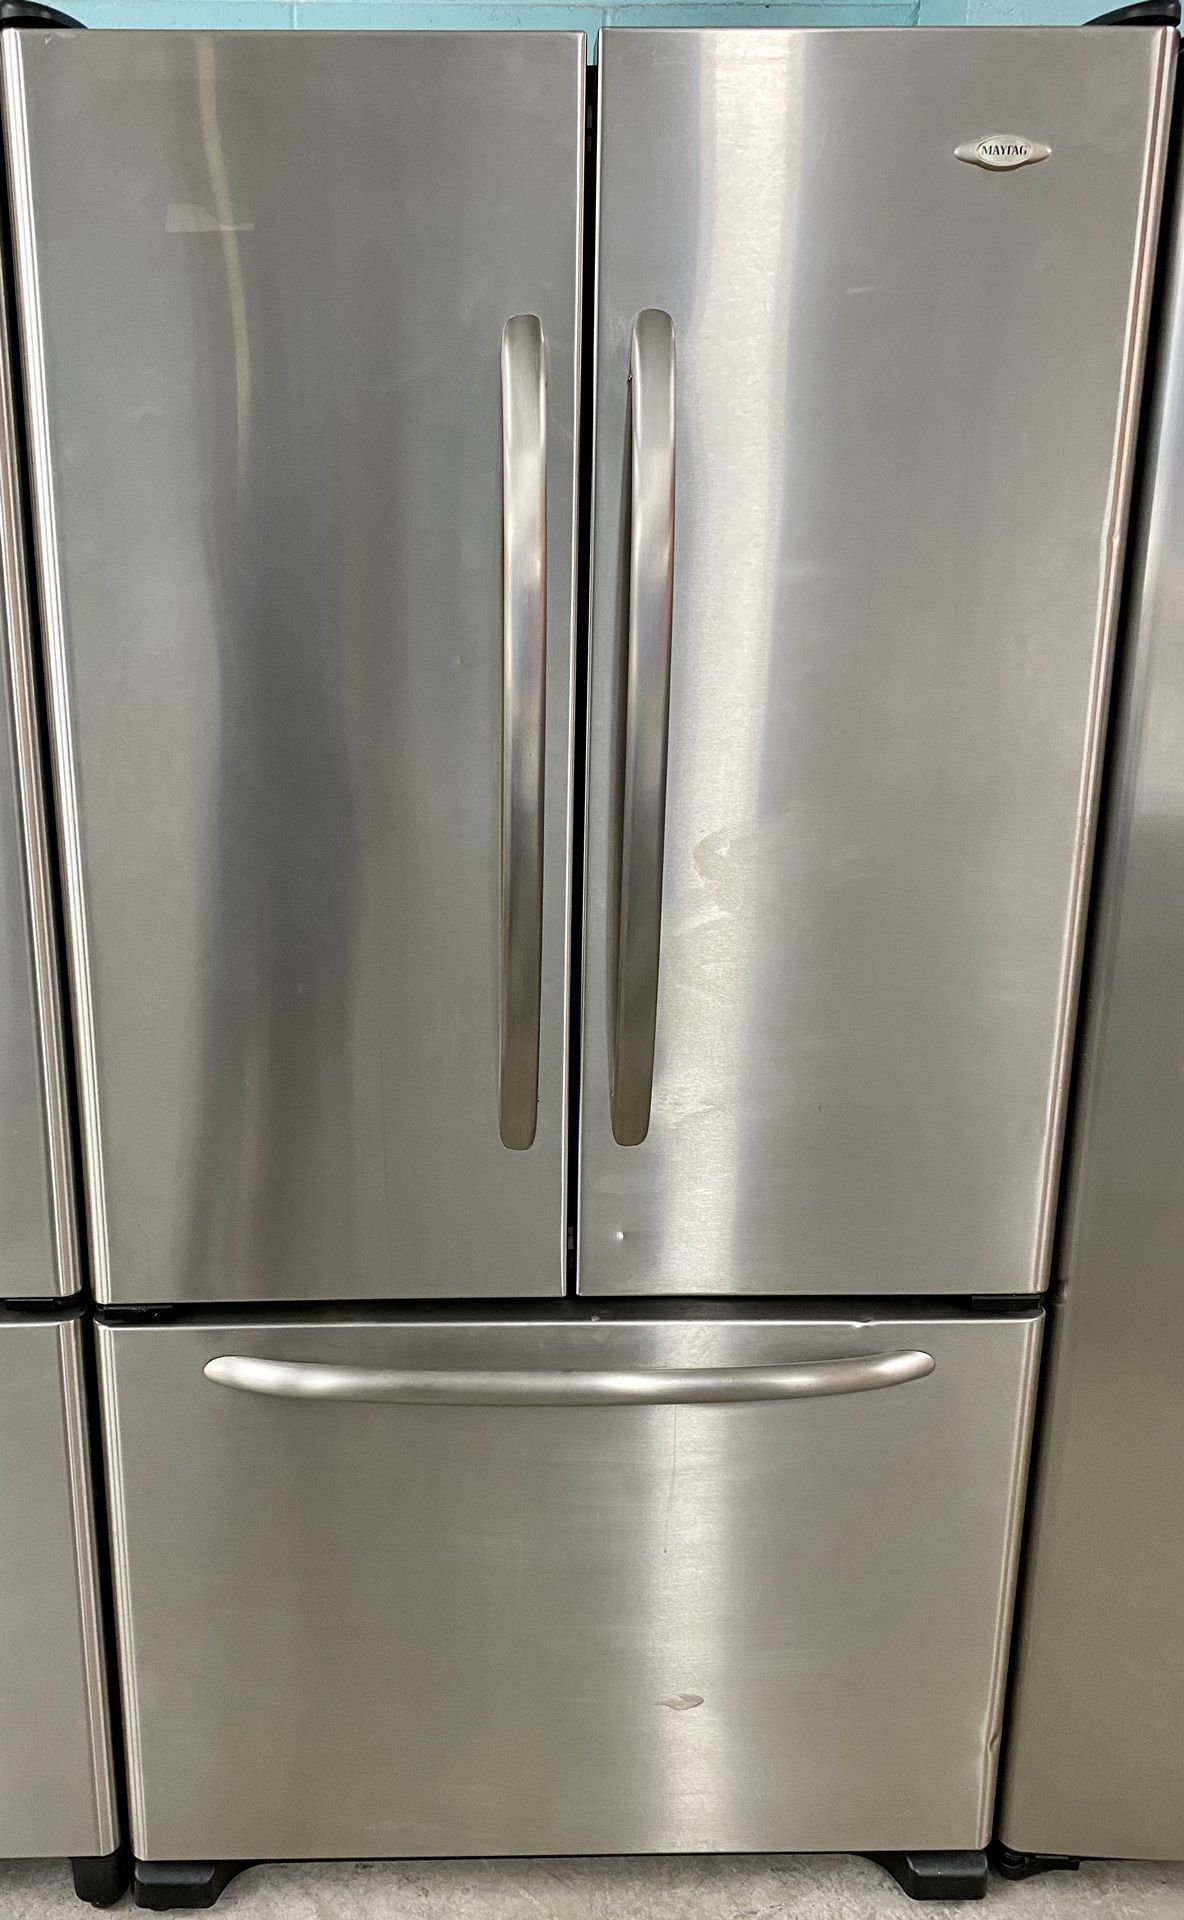 Stainless Steel Maytag French Door Refrigerator